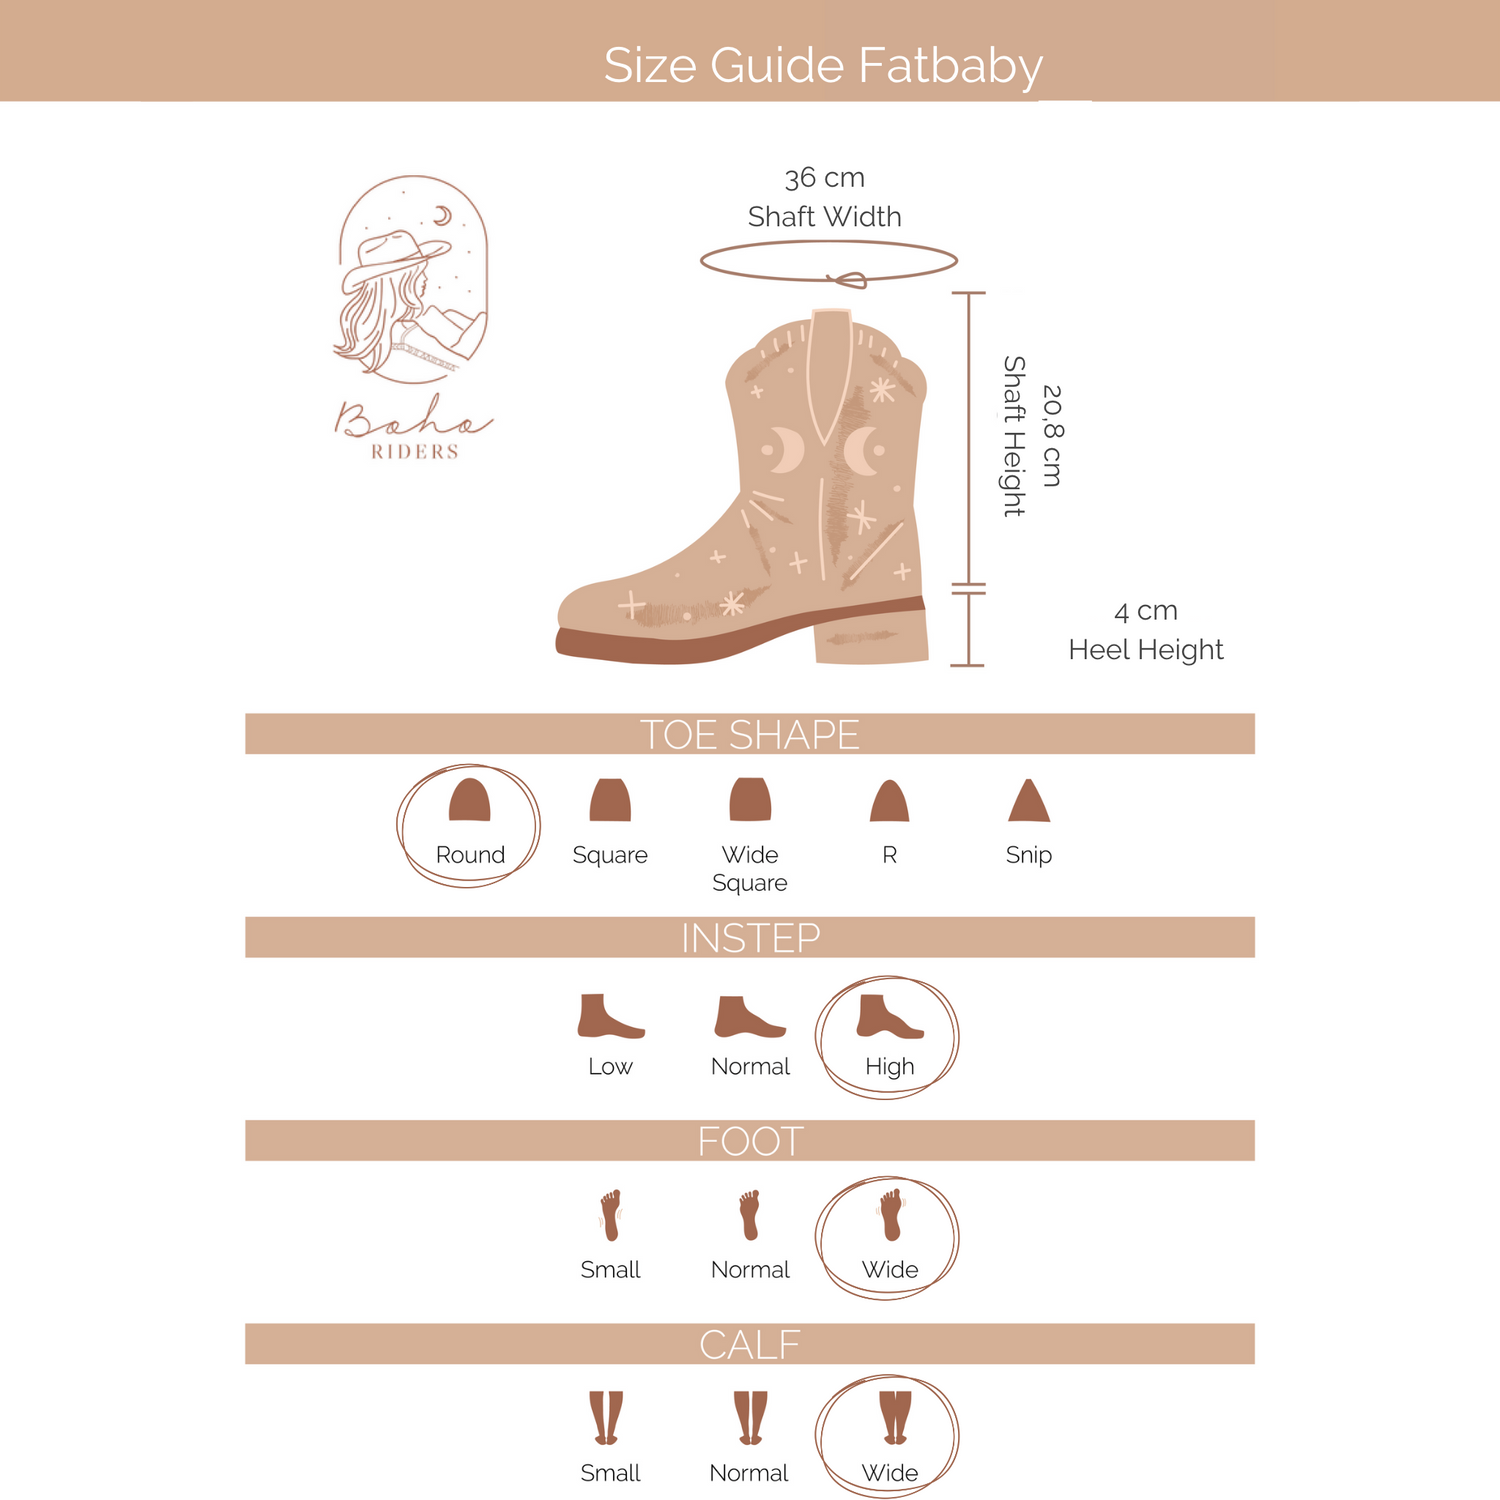 What you want to know about the fit ofAriat Fatbaby Saddle - Riding Boots - Russet Rebel - Lightweight